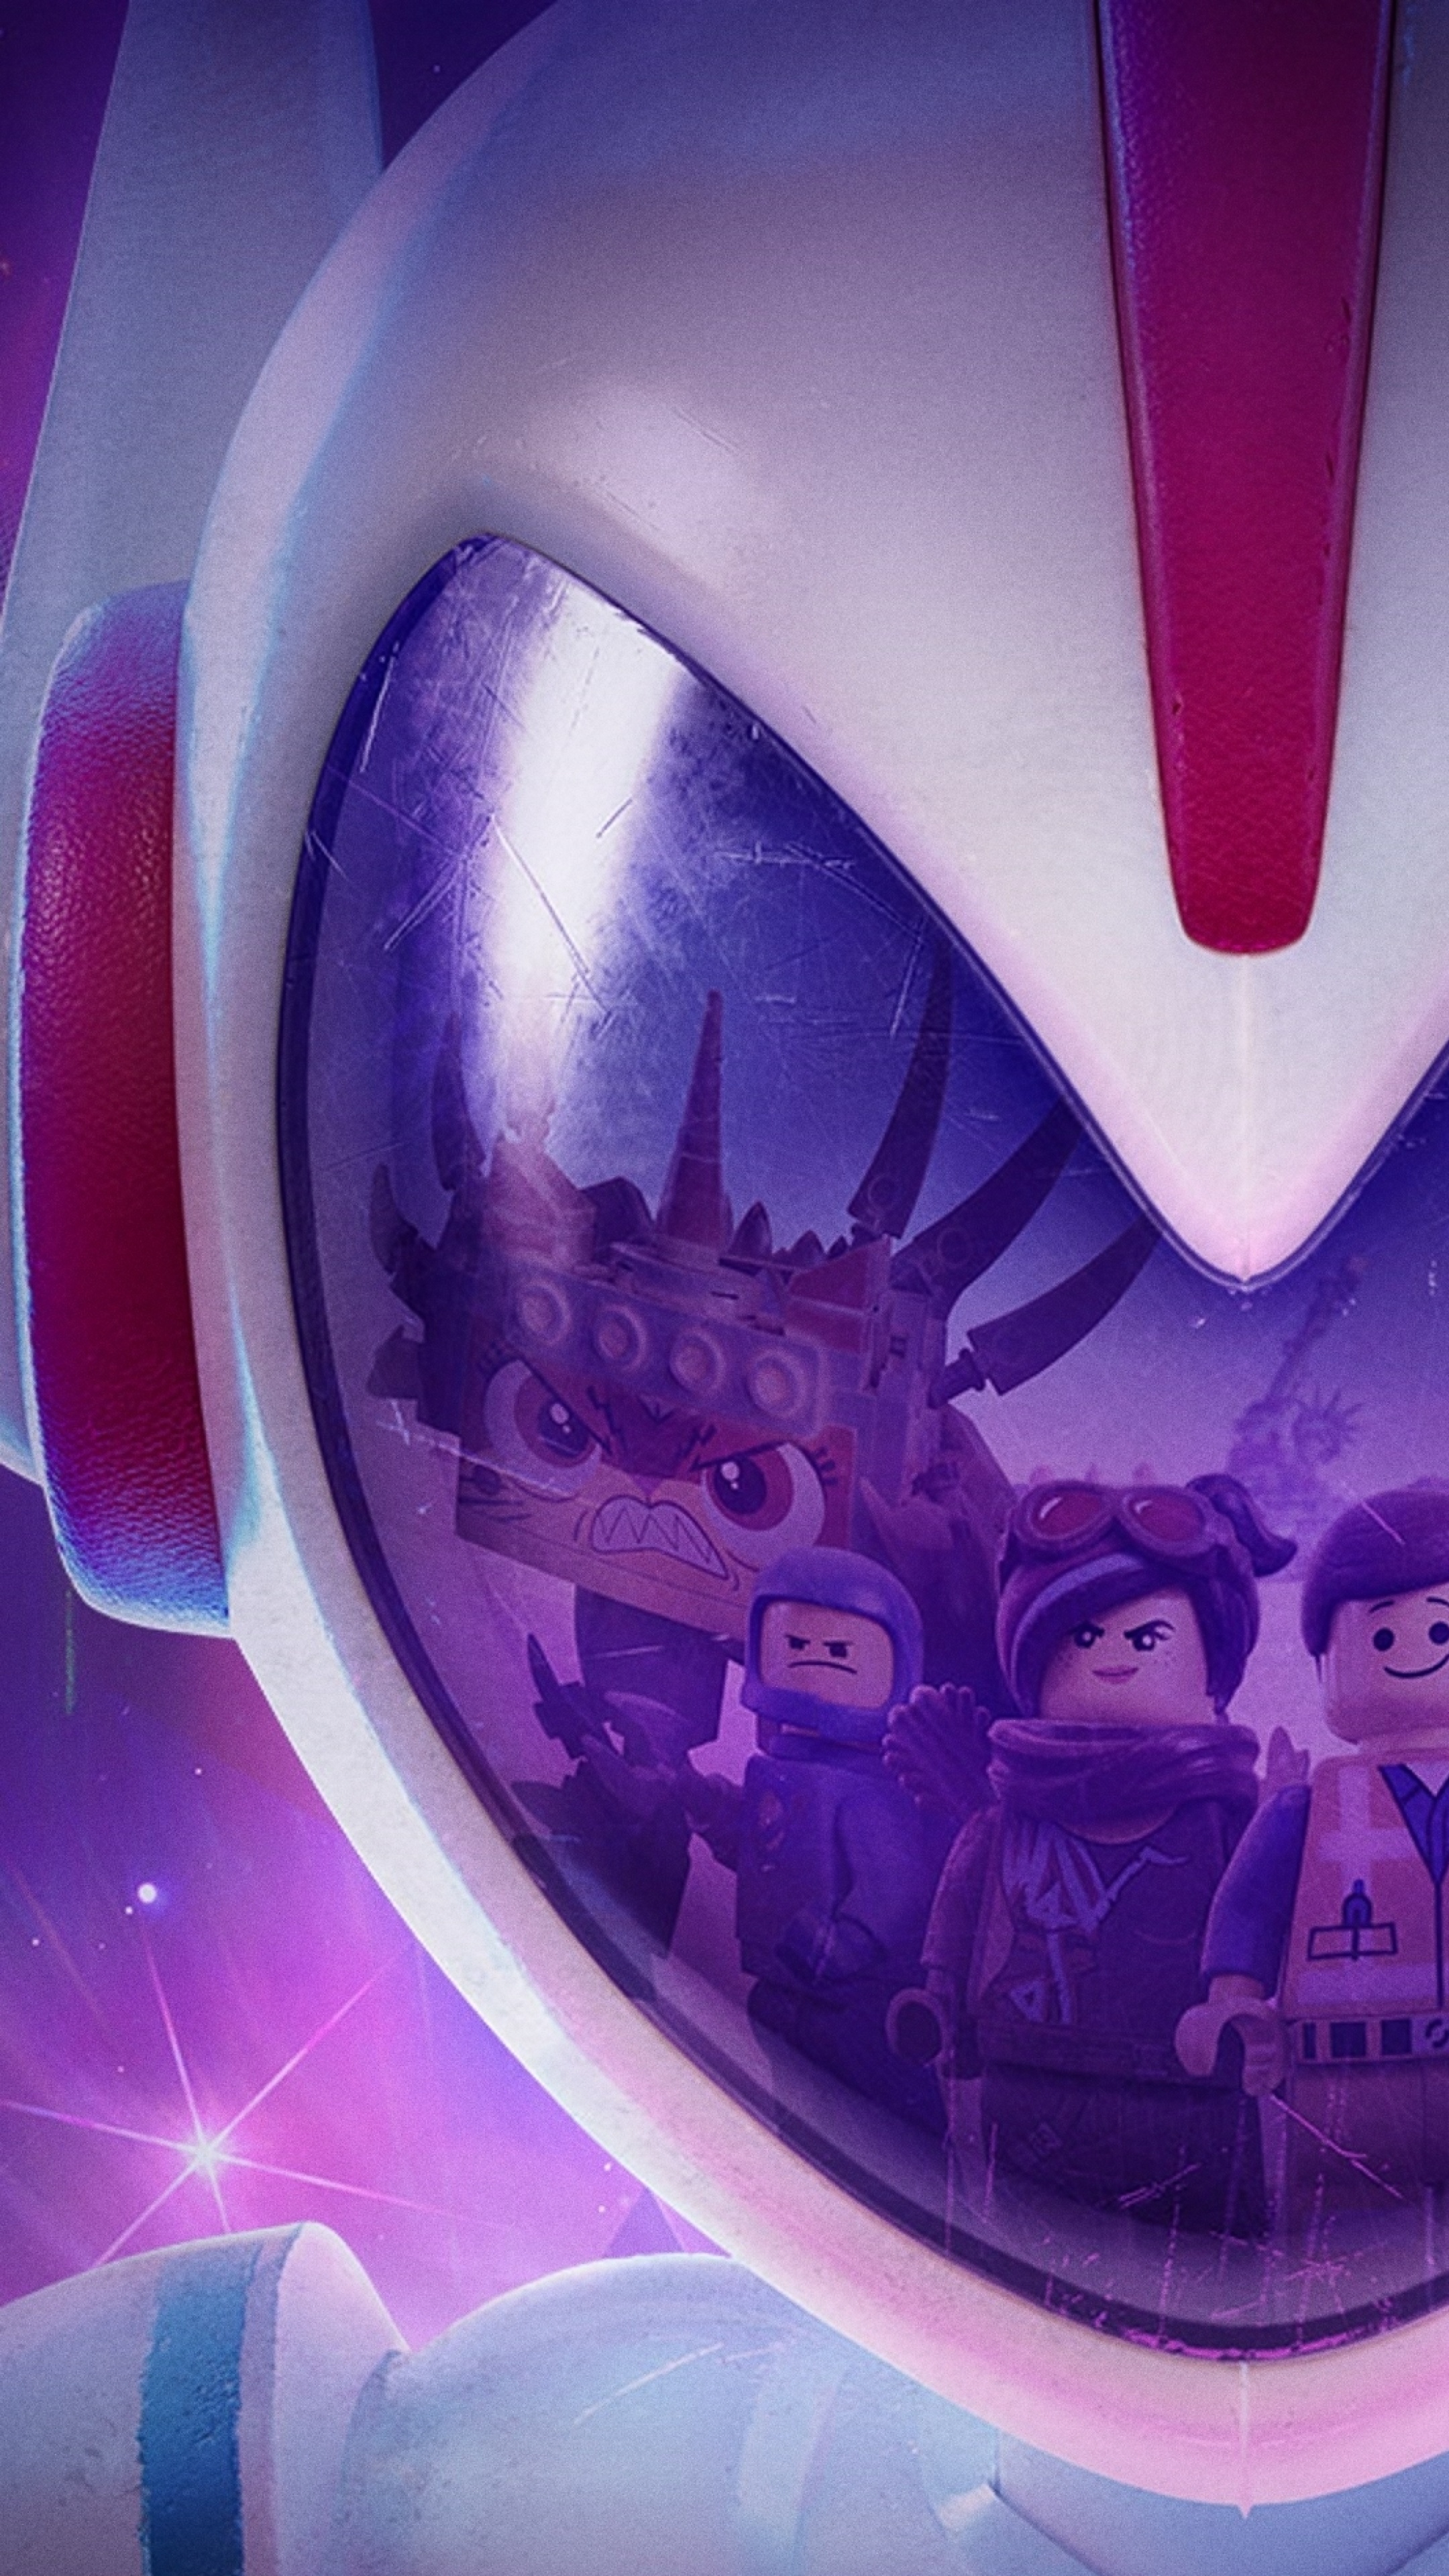 The Lego Movie 2, Wallpaper posted by Sarah Anderson, Lego movie, 2160x3840 4K Phone